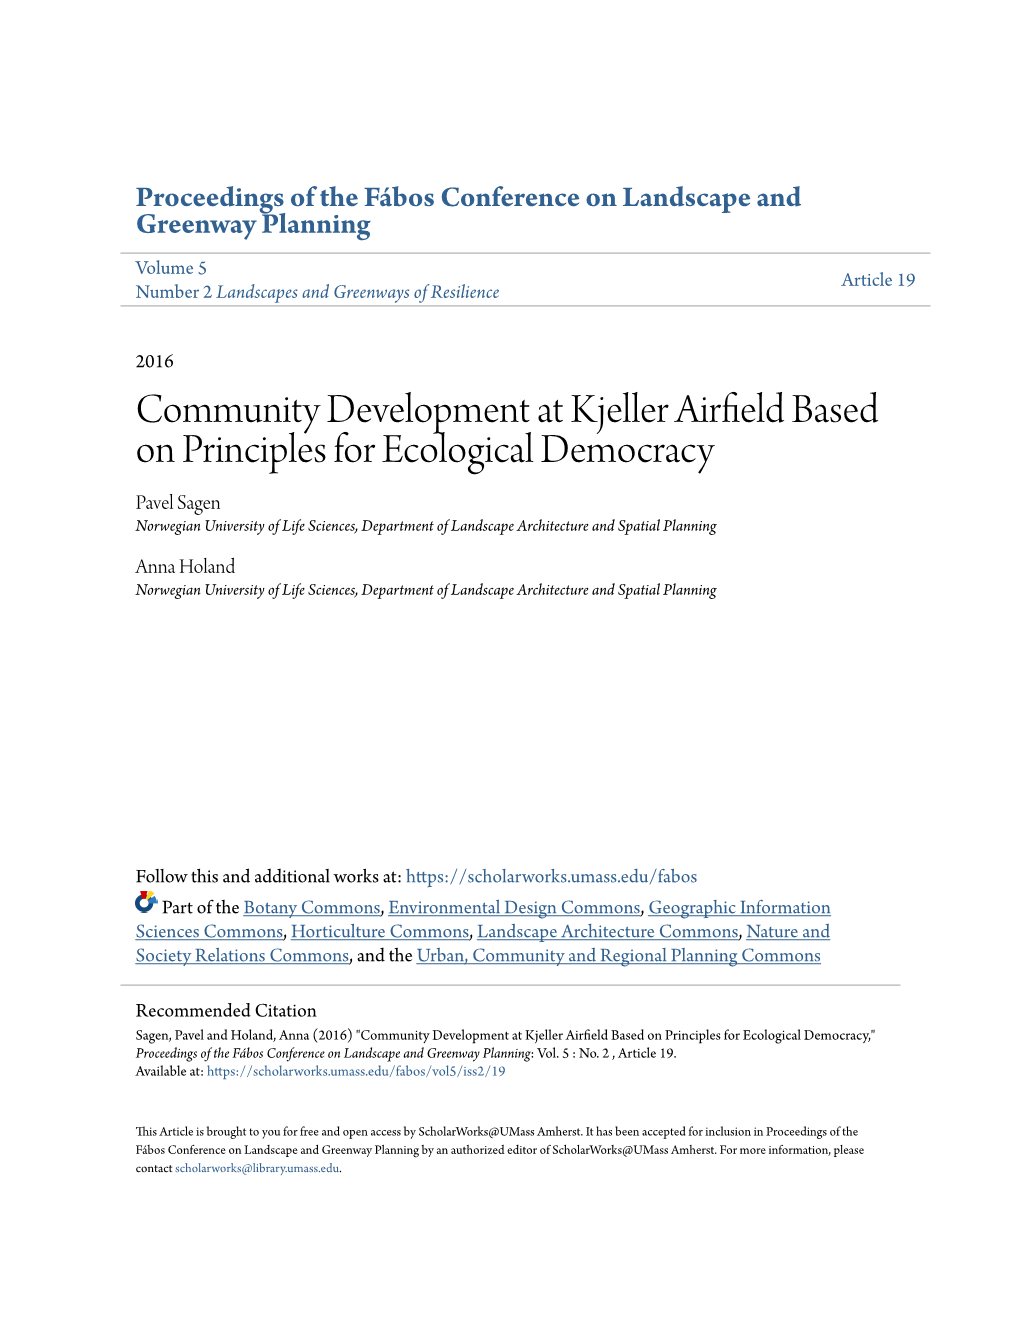 Community Development at Kjeller Airfield Based on Principles for Ecological Democracy," Proceedings of the Fábos Conference on Landscape and Greenway Planning: Vol